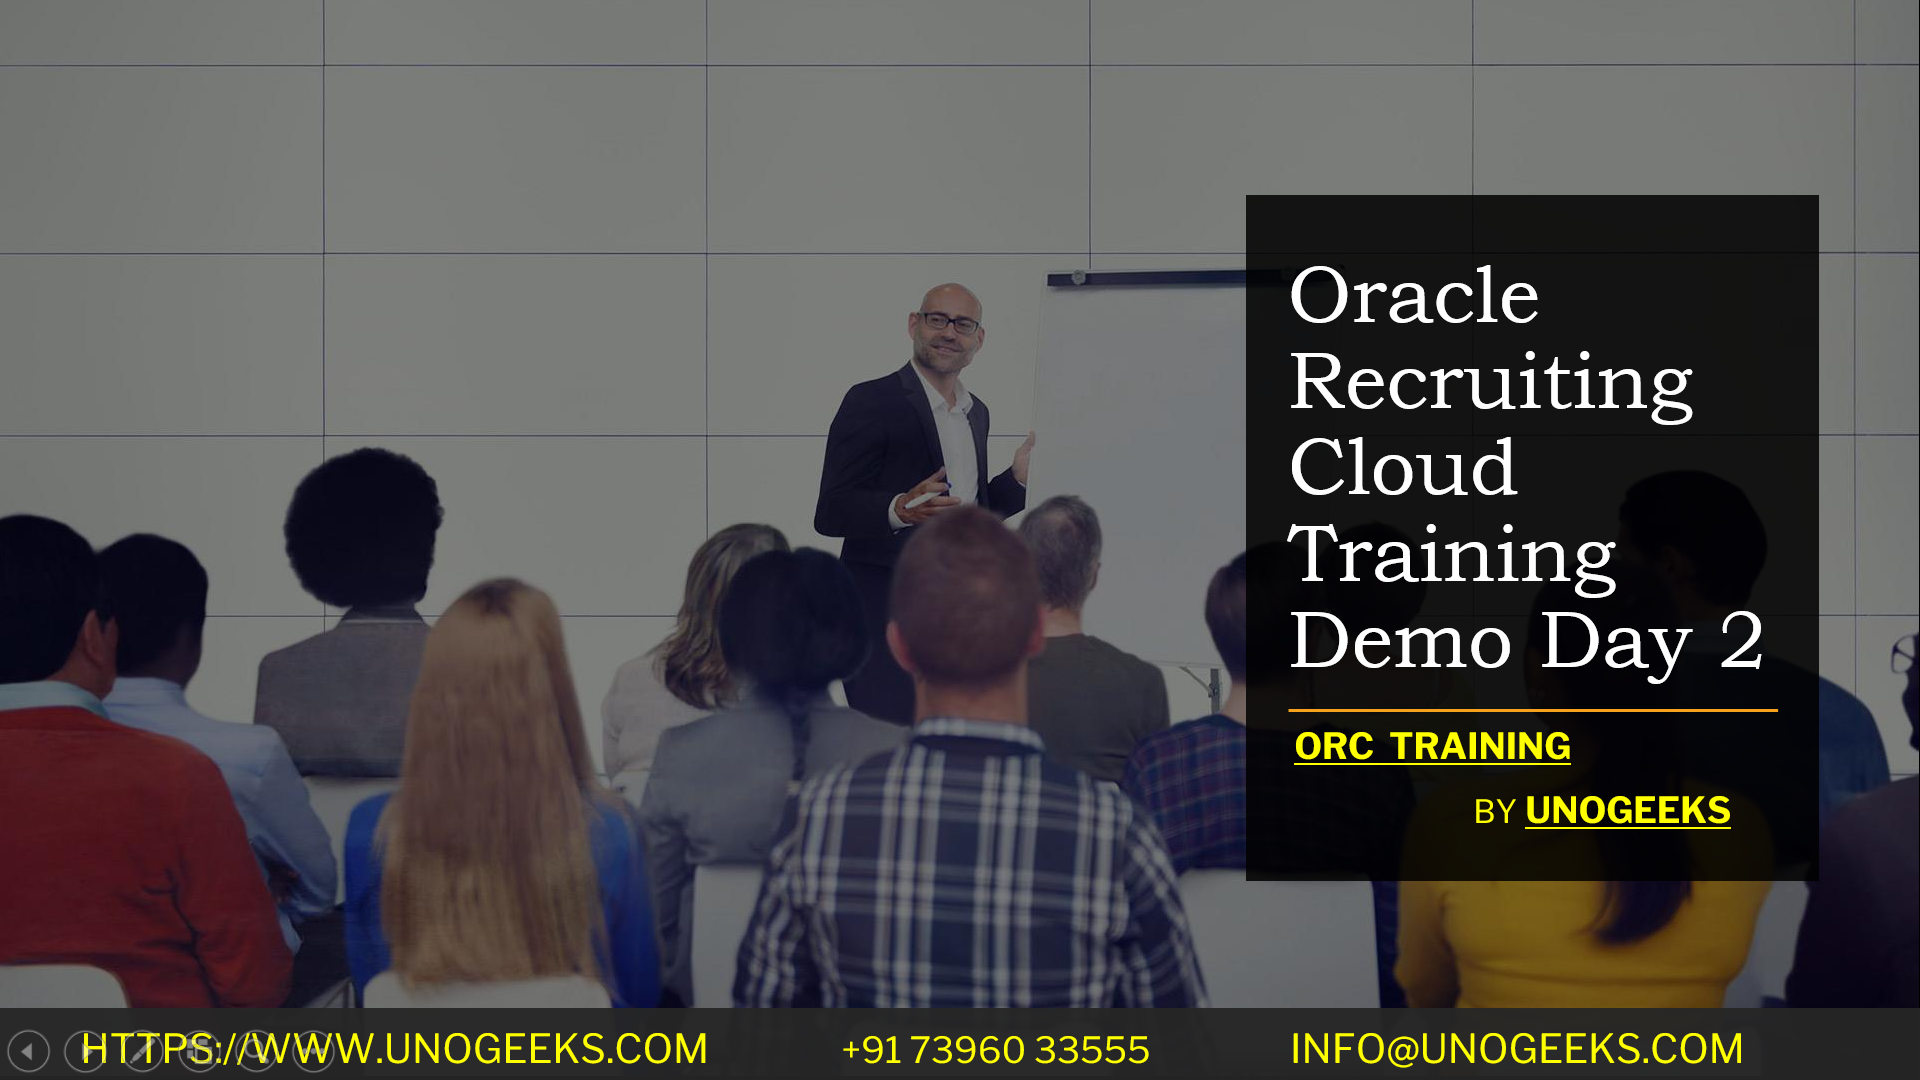 Oracle Recruiting Cloud Training Demo Day 2